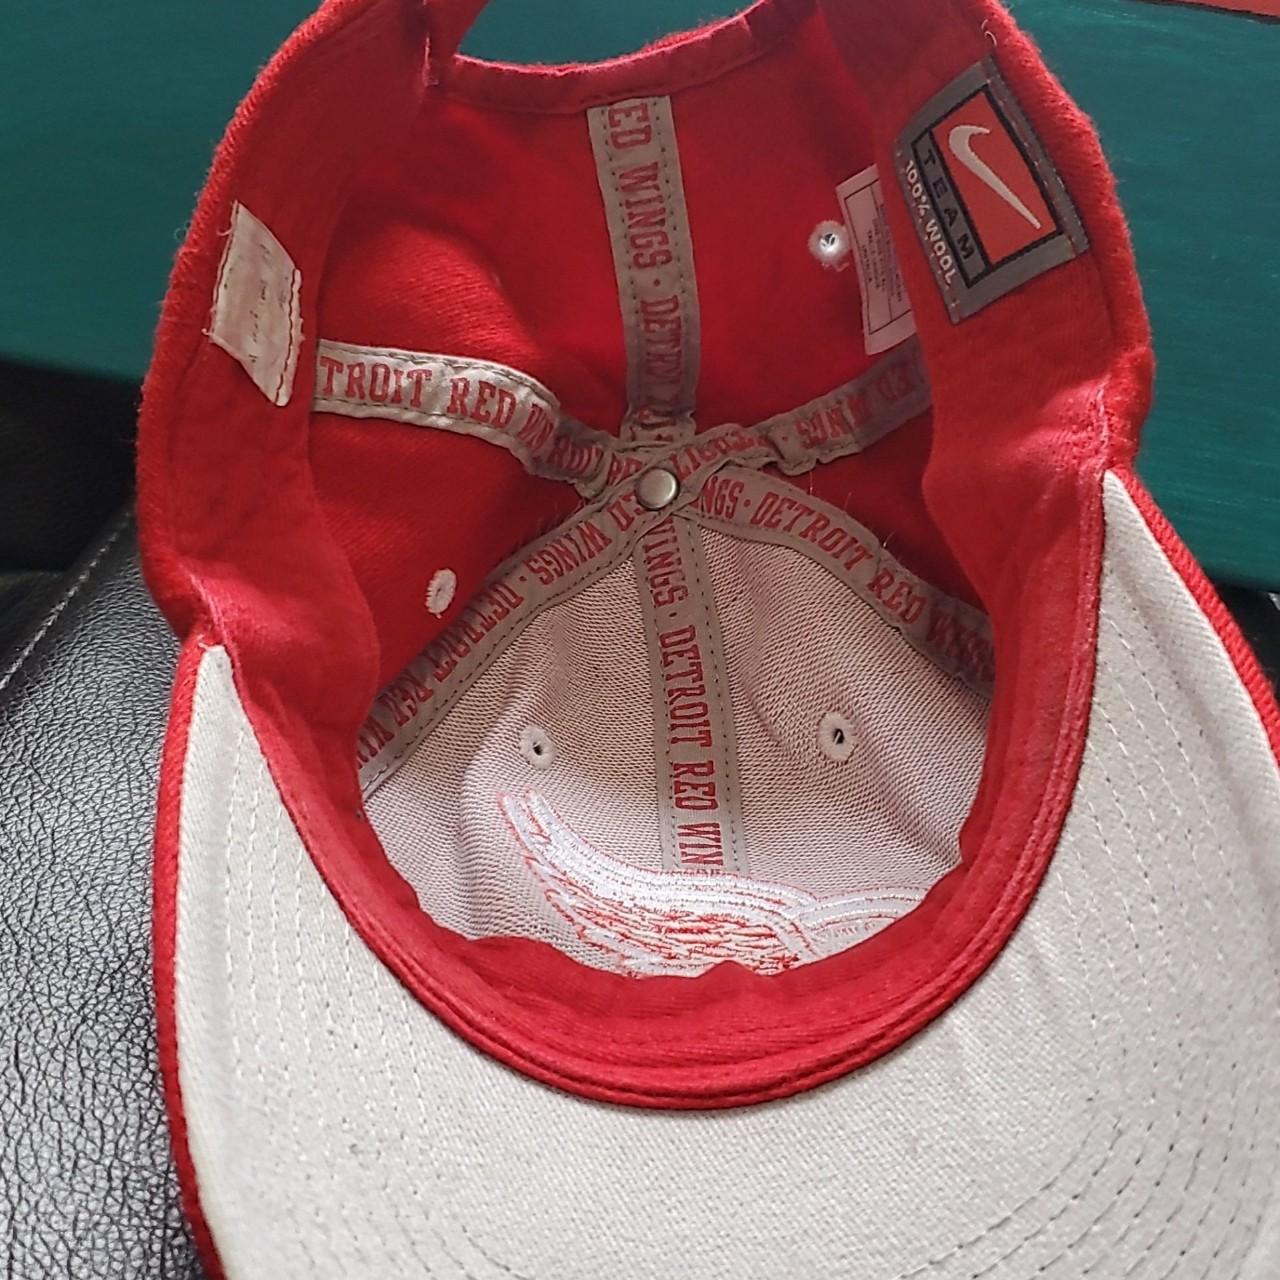 Product Image 3 - Red Nike Detroit Redwings velcro🏒🧢

Size: